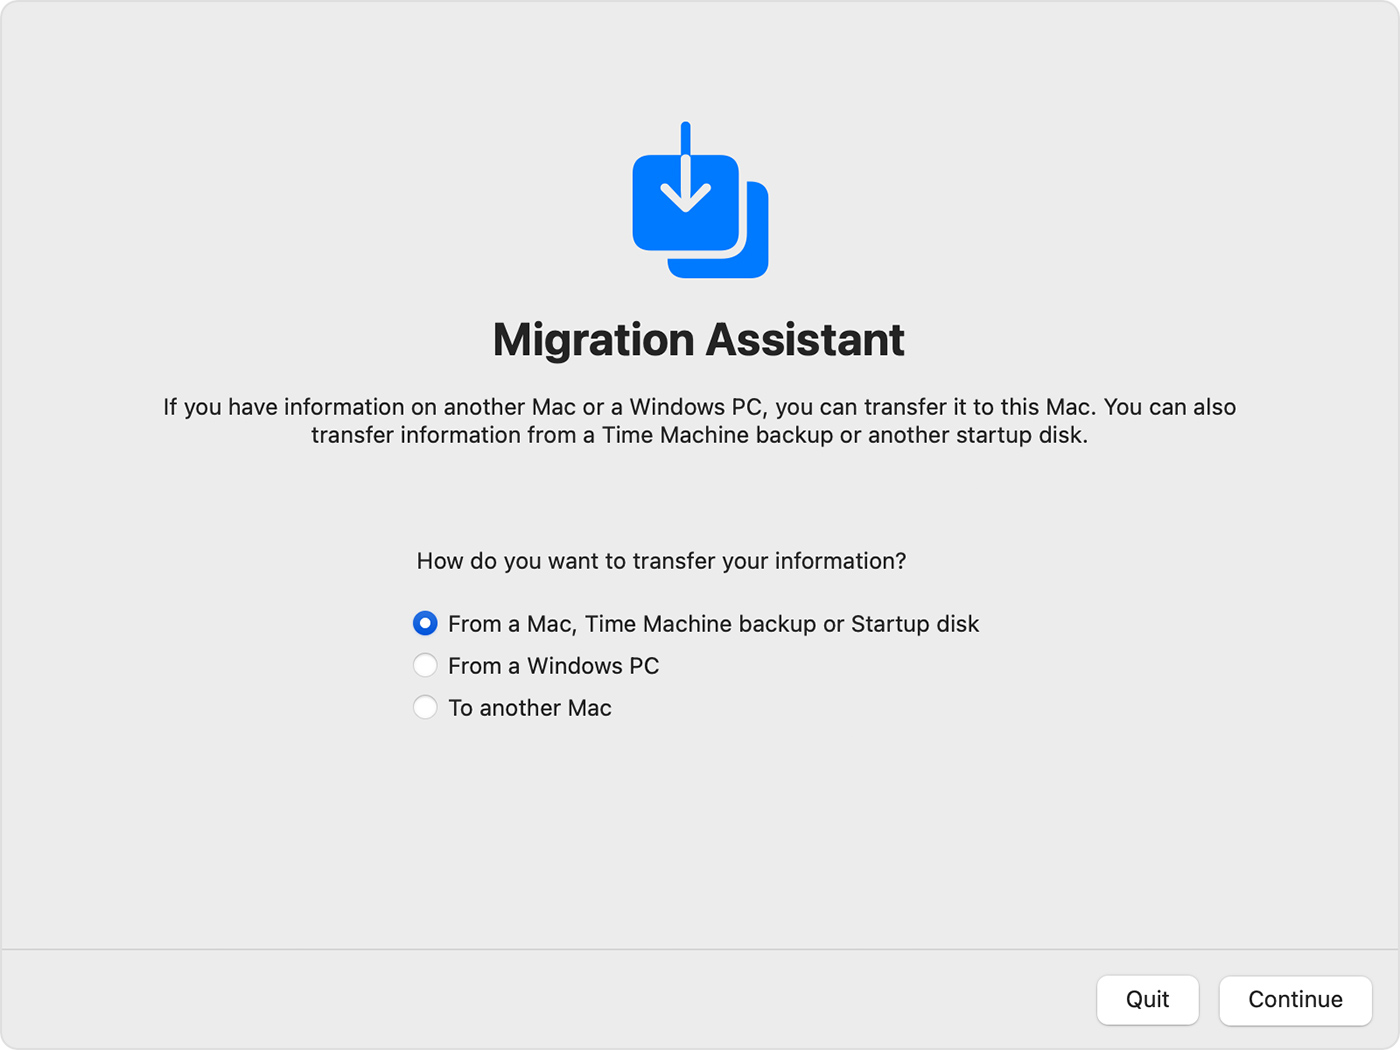 Migration Assistant: How do you want to transfer your information?